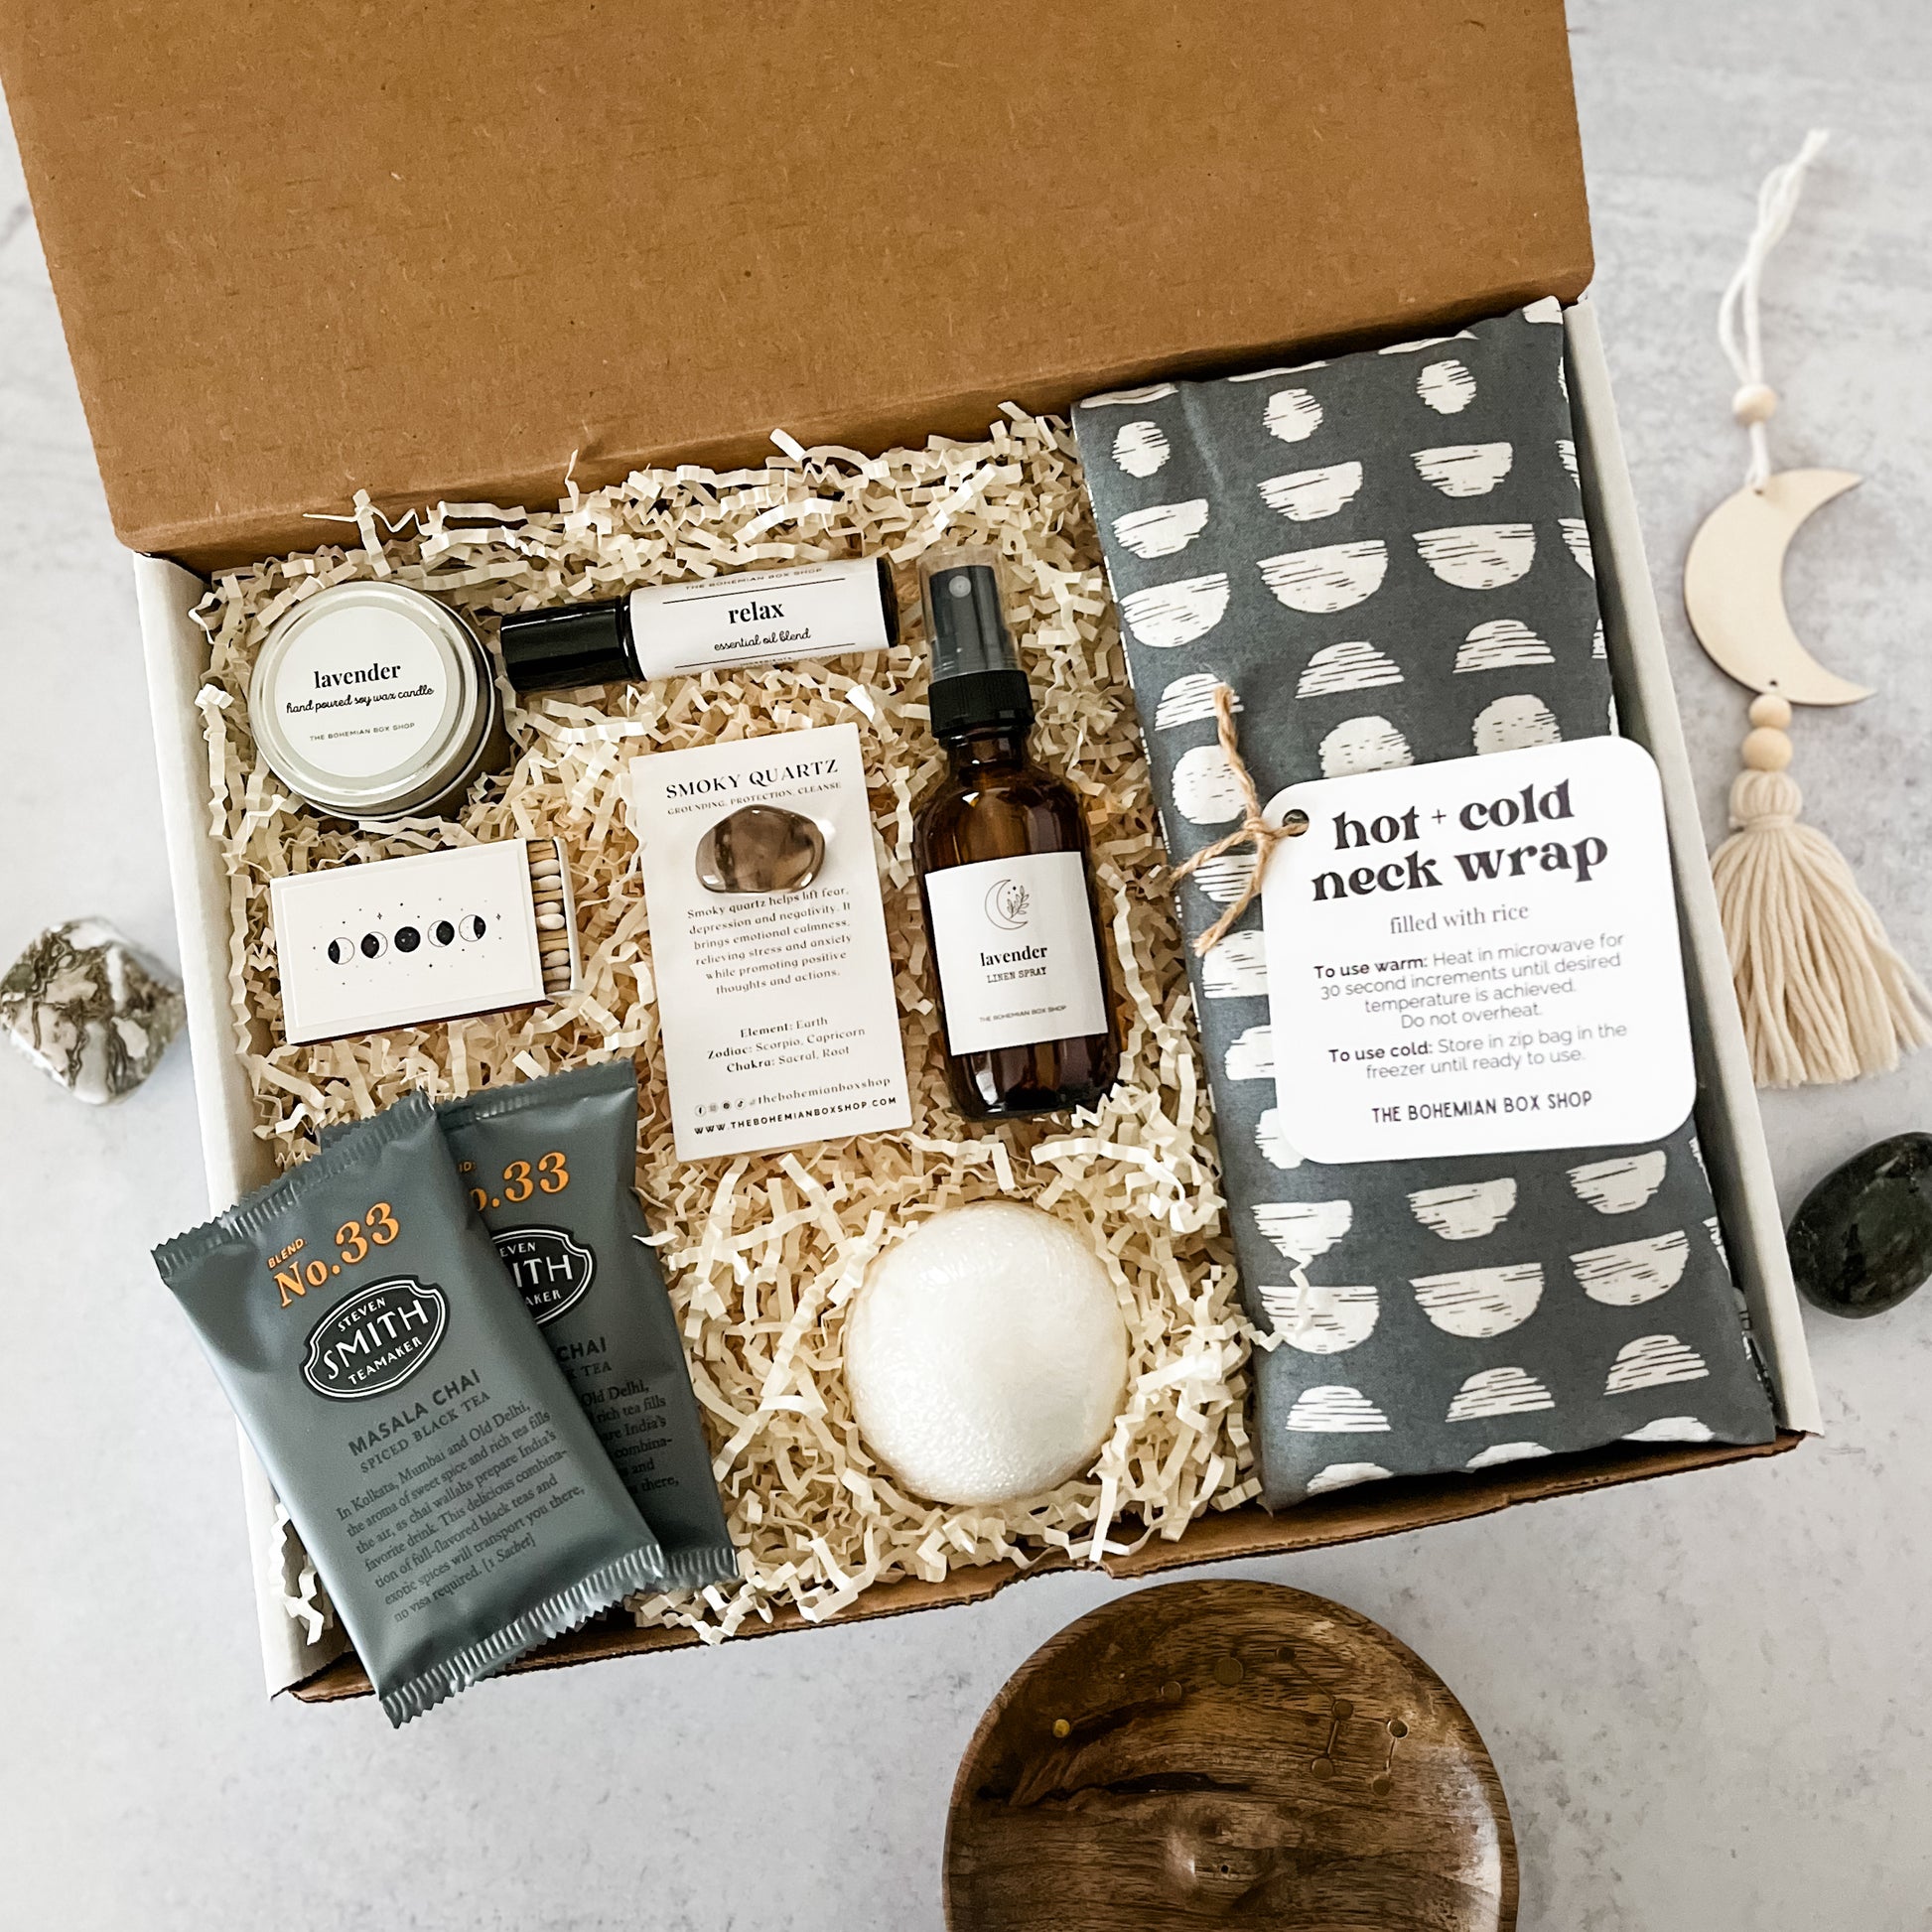 Gender Neutral Moon Spa Gift Set. Includes a soy candle, moon matchbox, tea packets, roller bottle, smoky quartz crystal, lavender linen spray, bath bomb and moon pattern hot and cold neck wrap.